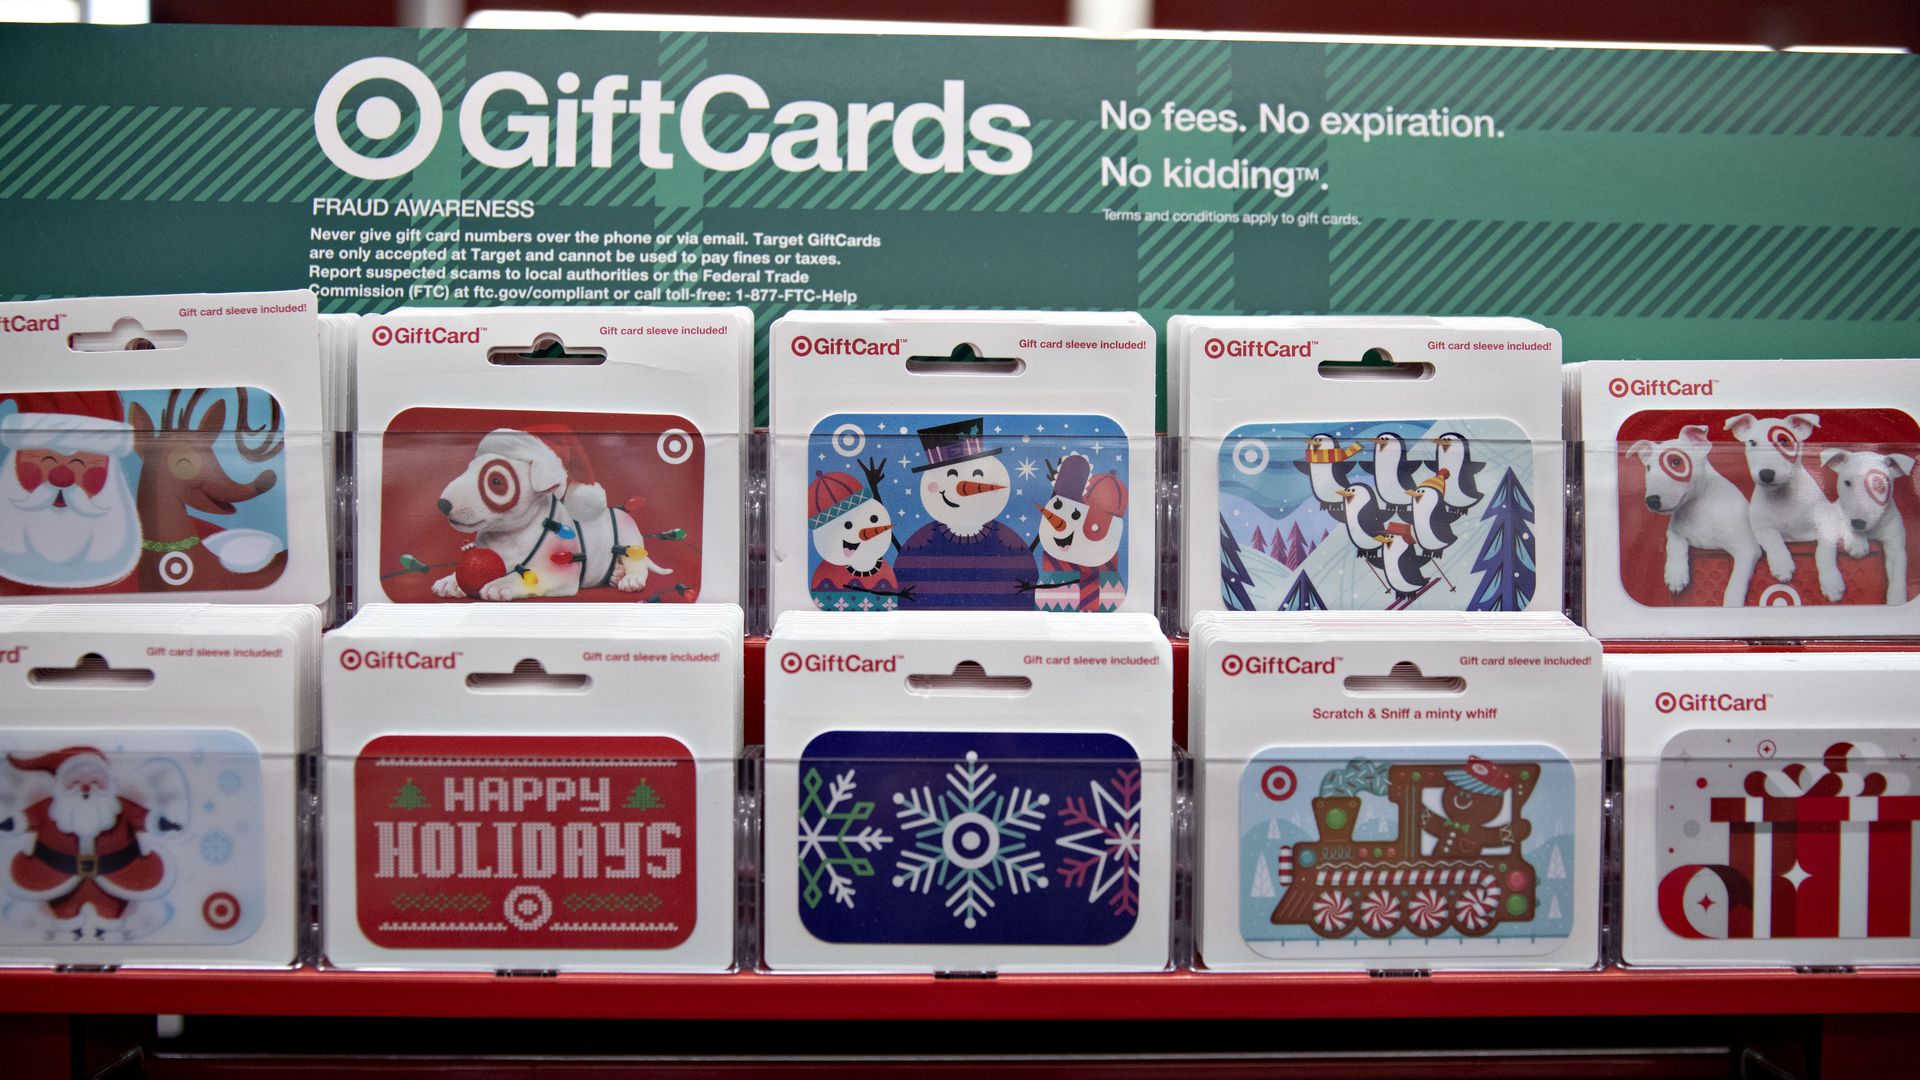 RedCard Holders: Target Gift Card Purchases Up to $500